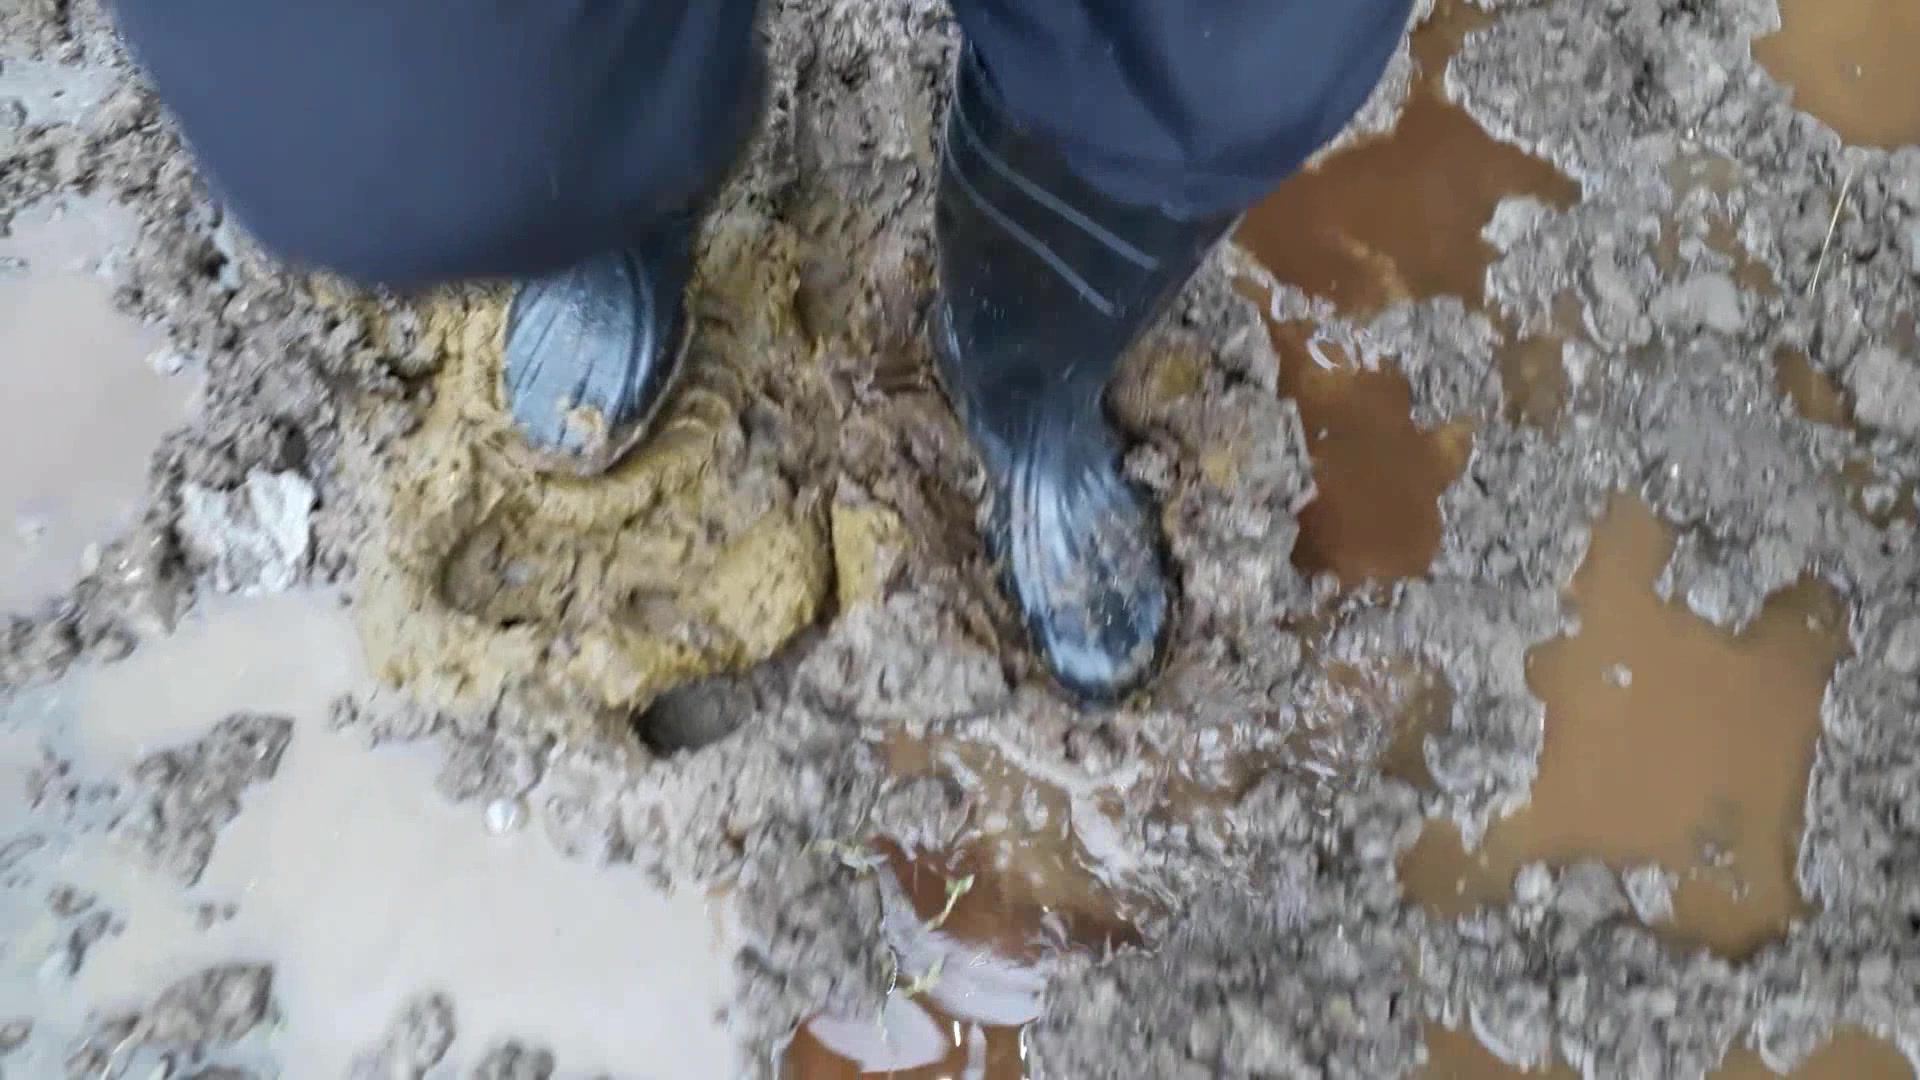 Rubber boots vs cowshit - video 10